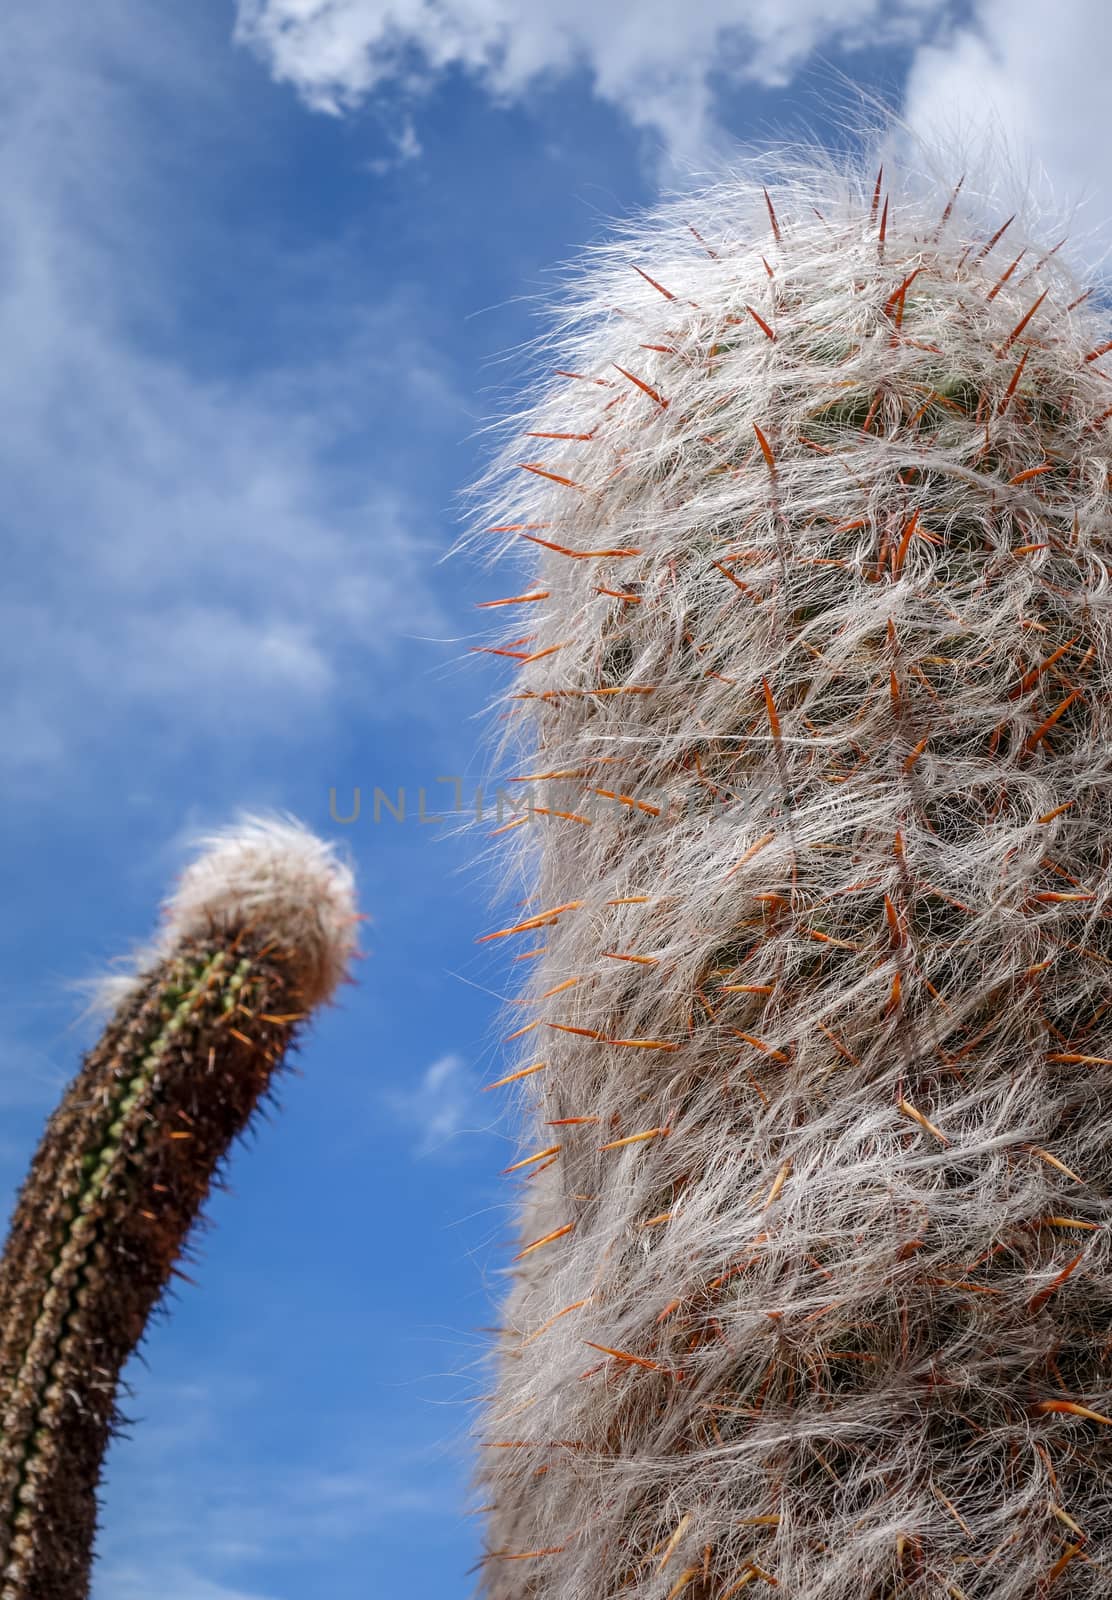 Hairy Cactus detail in the desert. Tilcara, Argentina